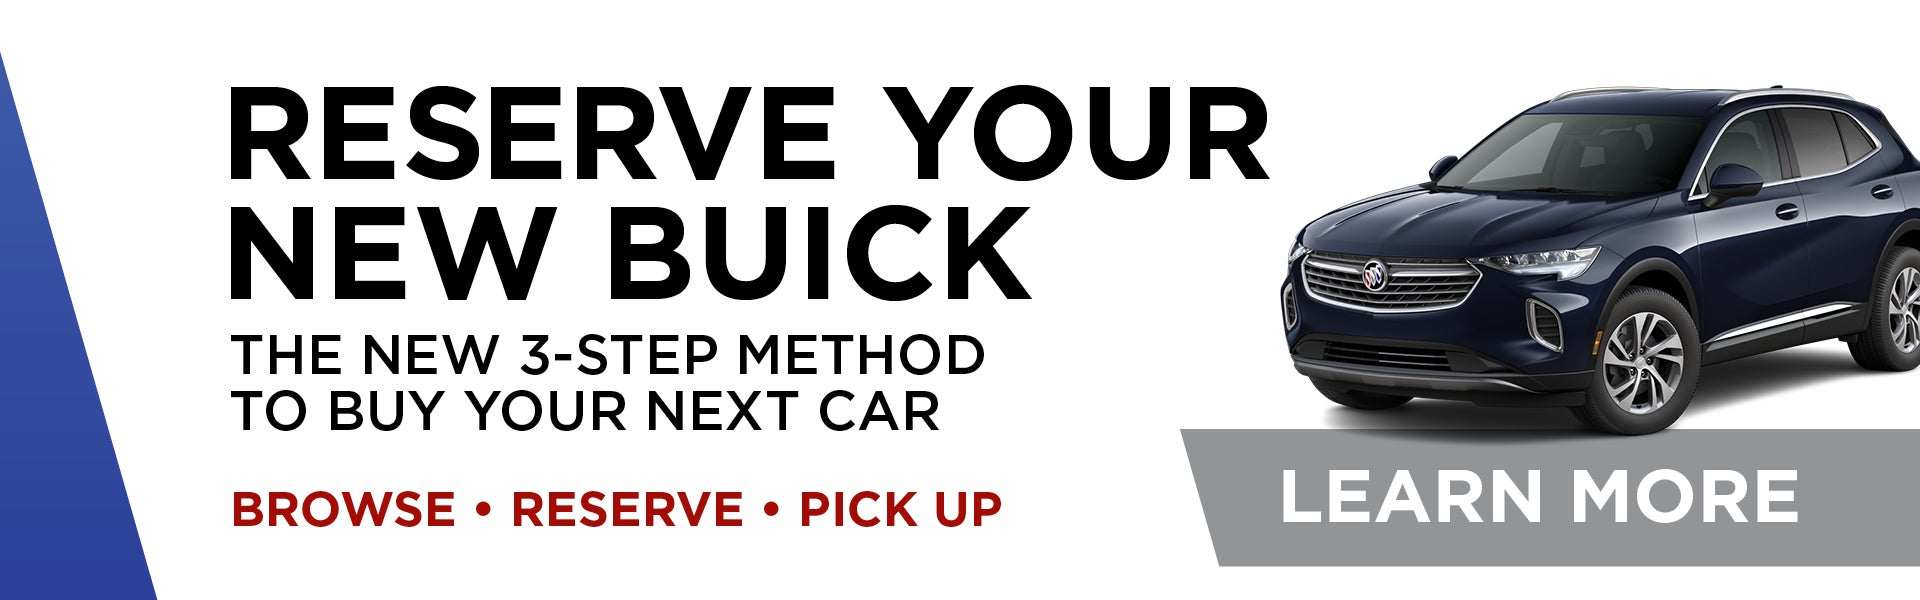 Reserve Your New Buick